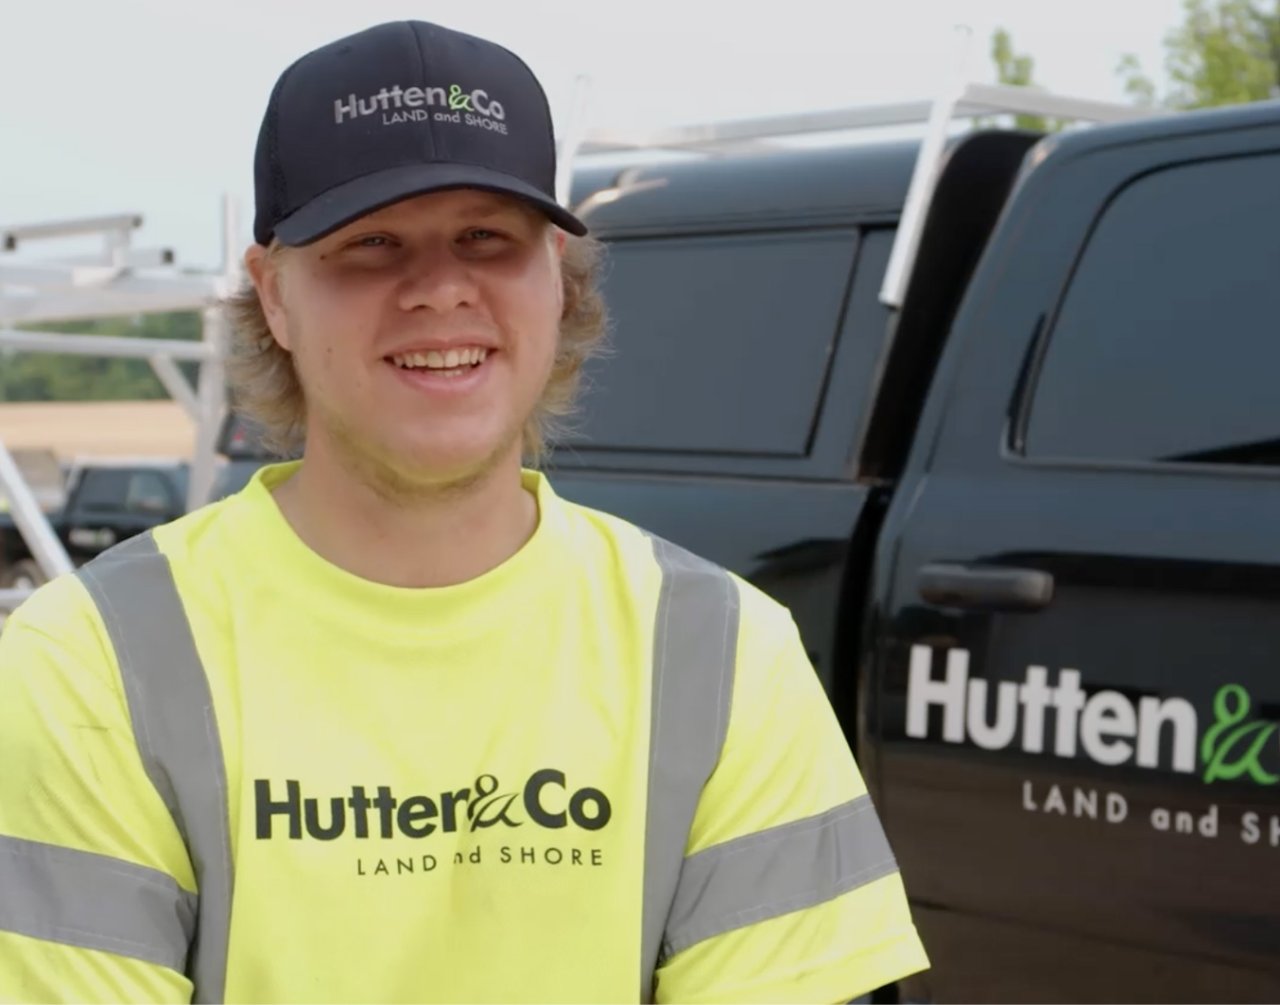 Hutten & Co. Land and Shore video